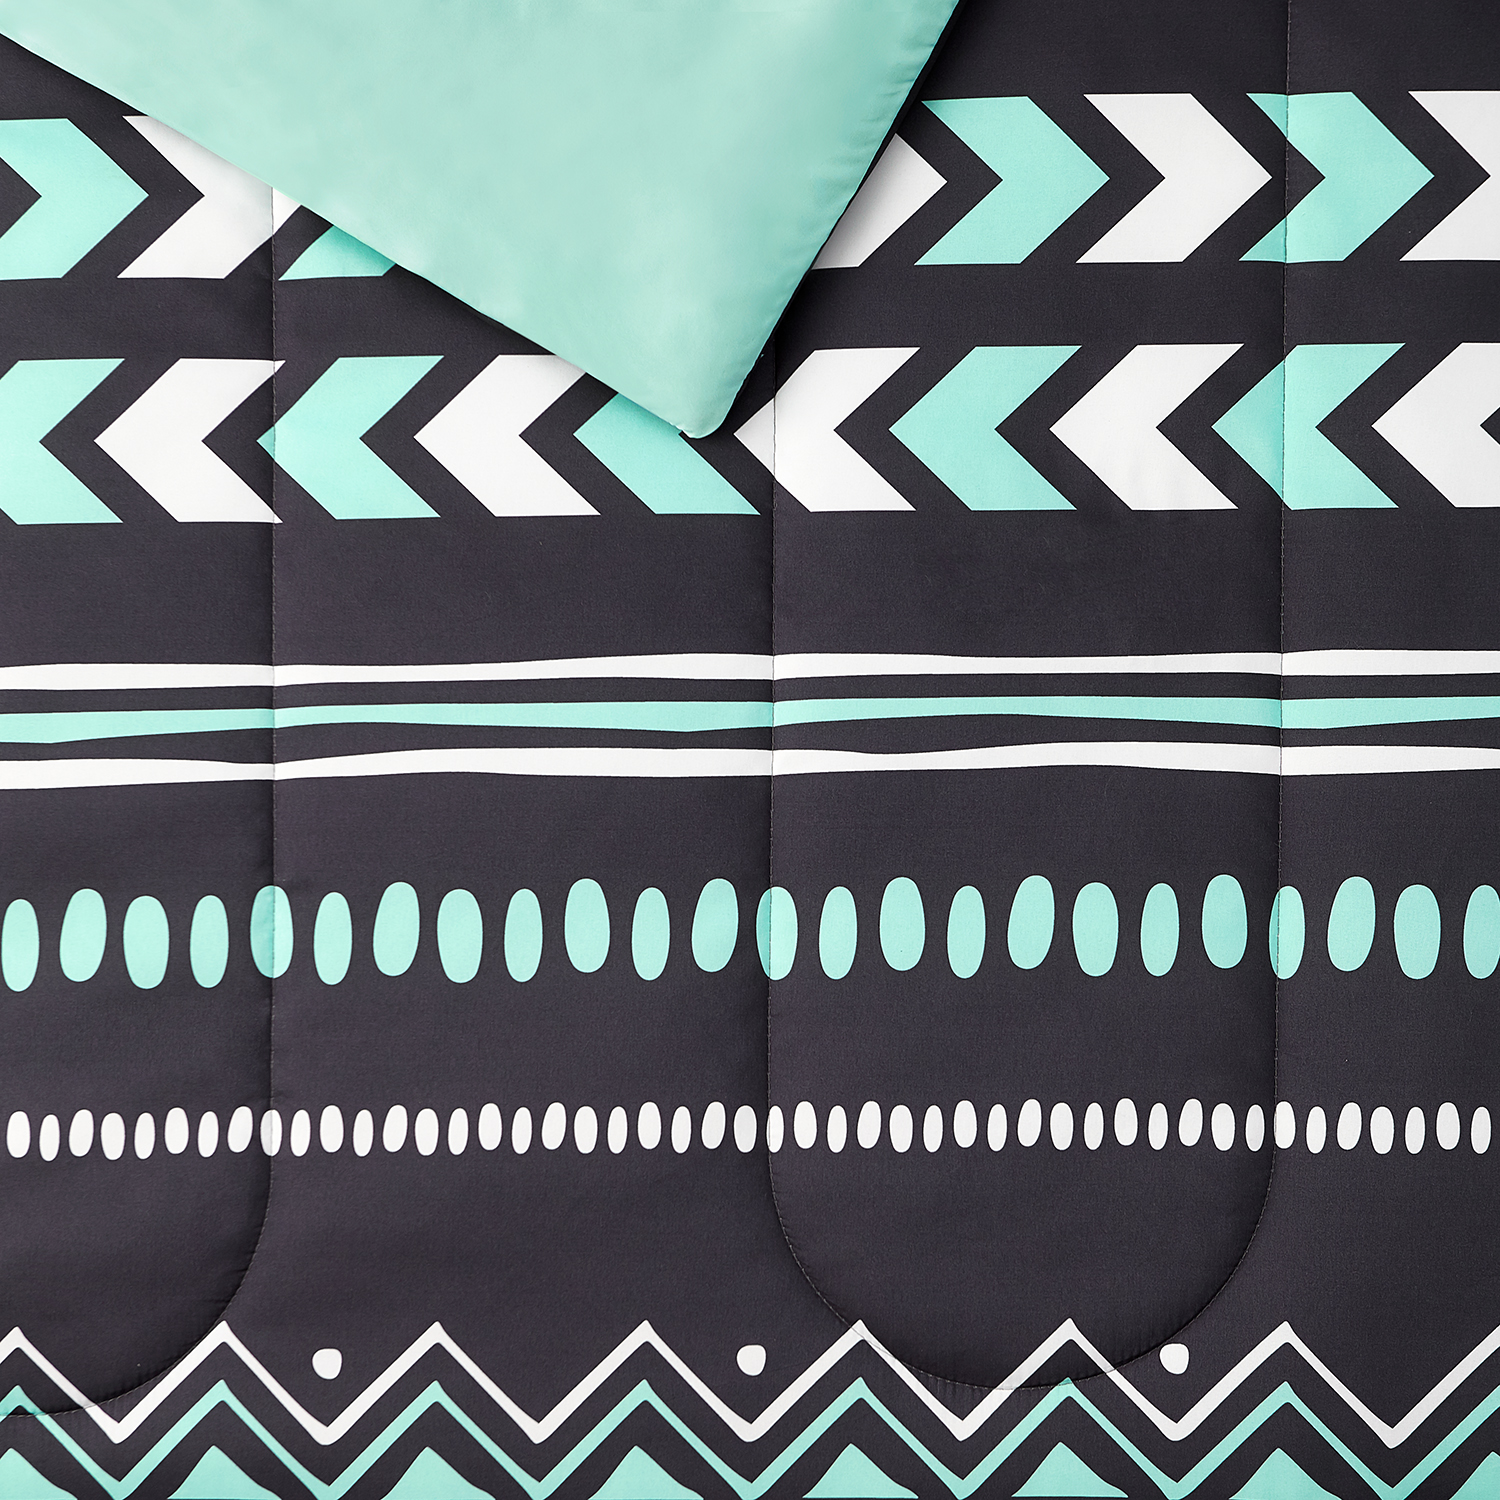 Your Zone Tribal Bedding Comforter Set, 1 Each - image 5 of 5